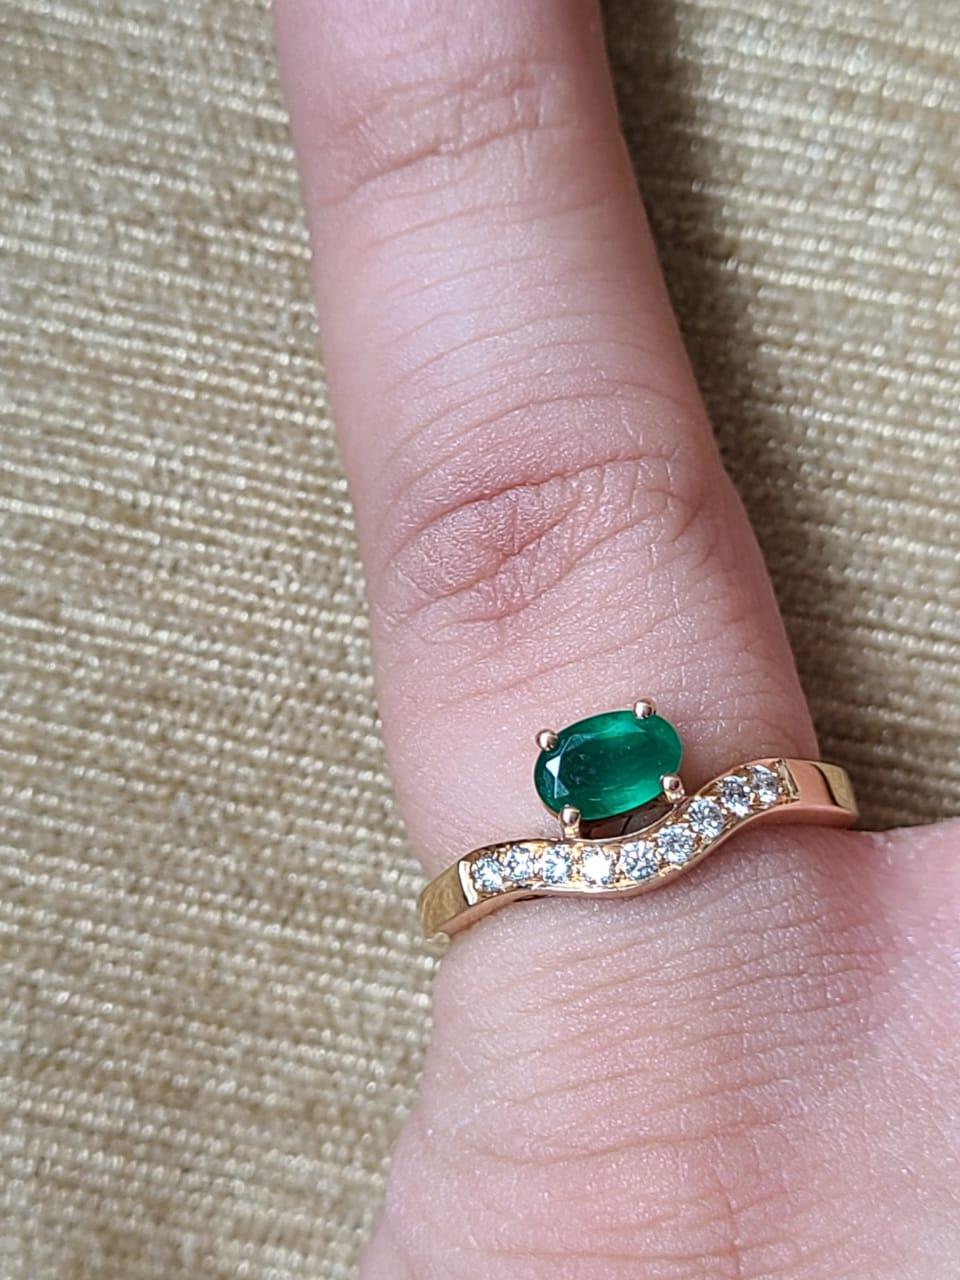 A very dainty and beautiful Emerald Engagement/ Wedding Ring set in 18K Yellow Gold & Diamonds.  The weight of the Emerald is 0.53 carats. The Emerald oval is completely natural, without any treatment & is of Zambian origin. The weight of the